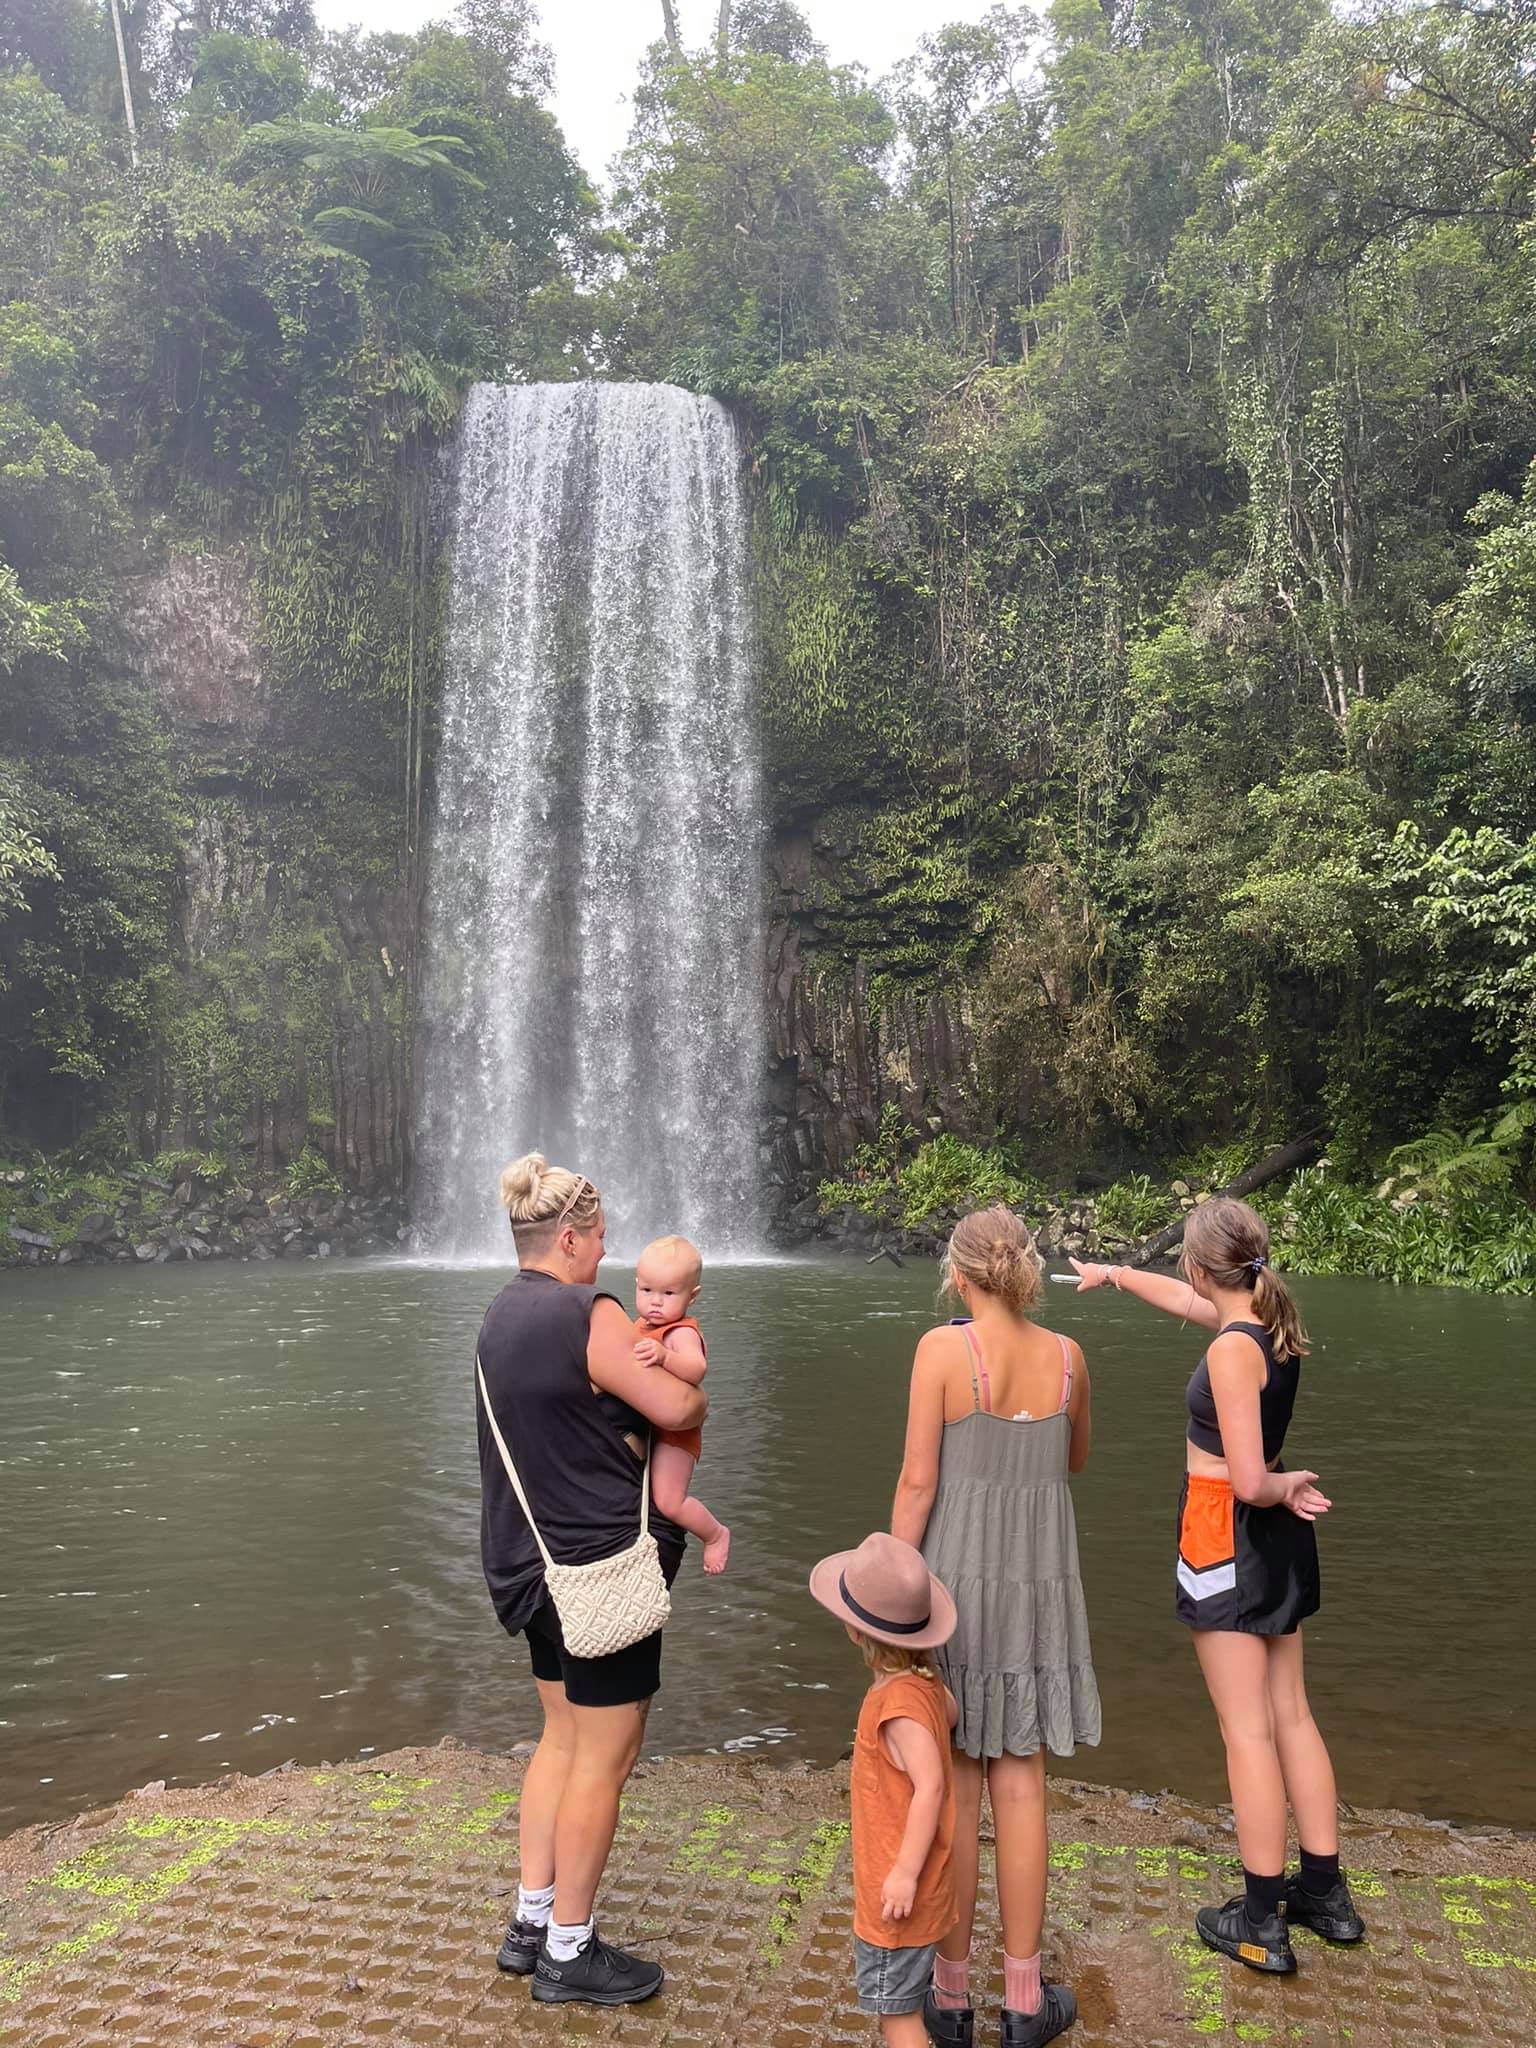 A family poses together for a photo at a waterfall.